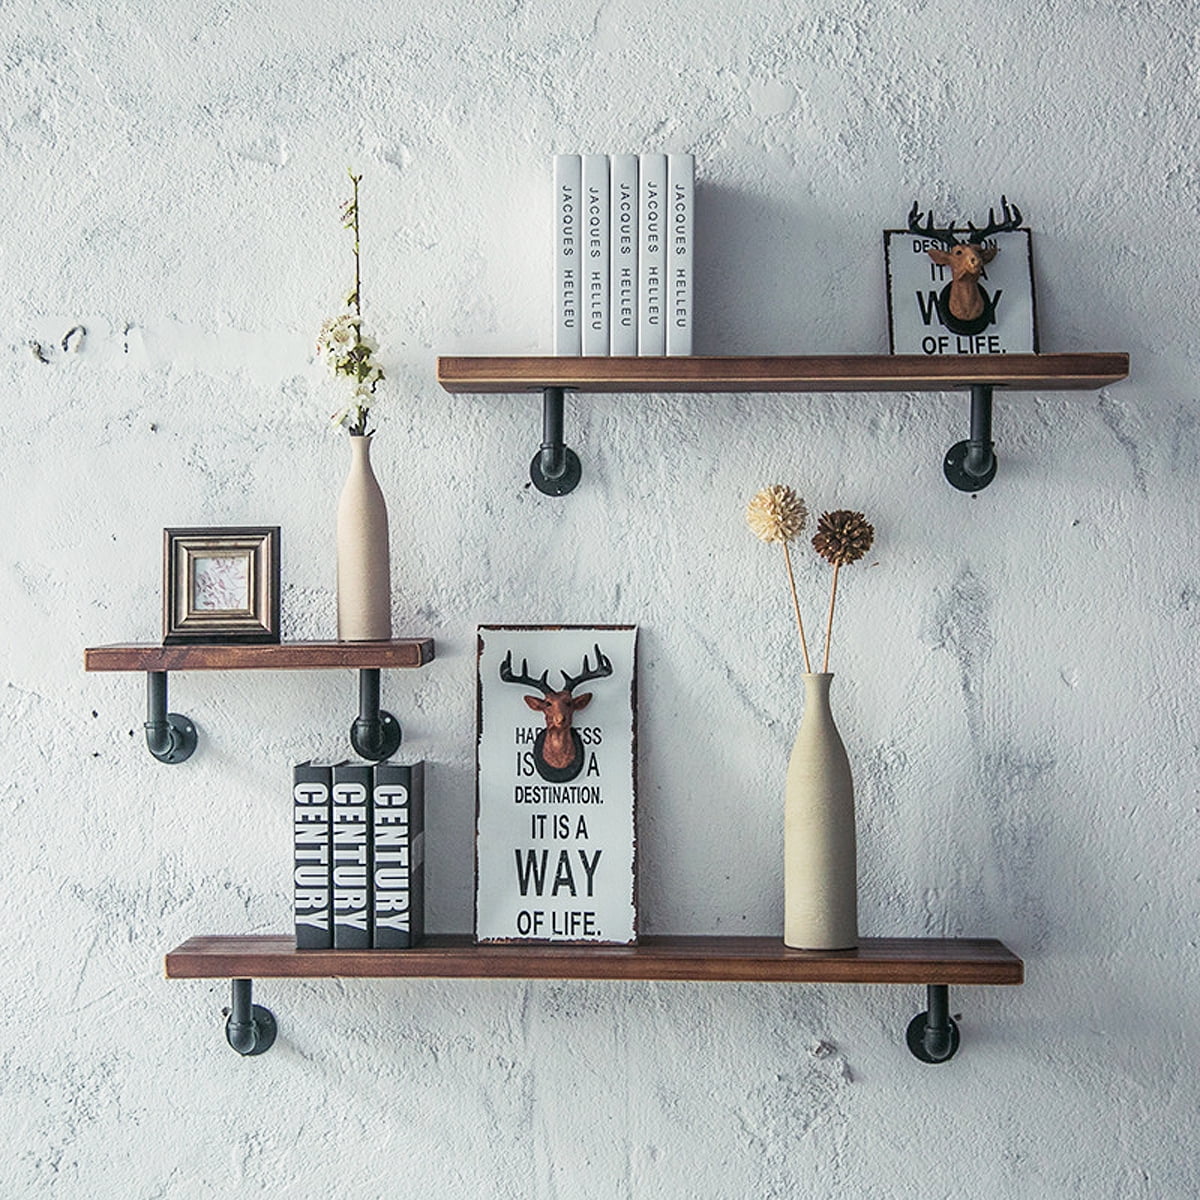 wood wall shelves with brackets